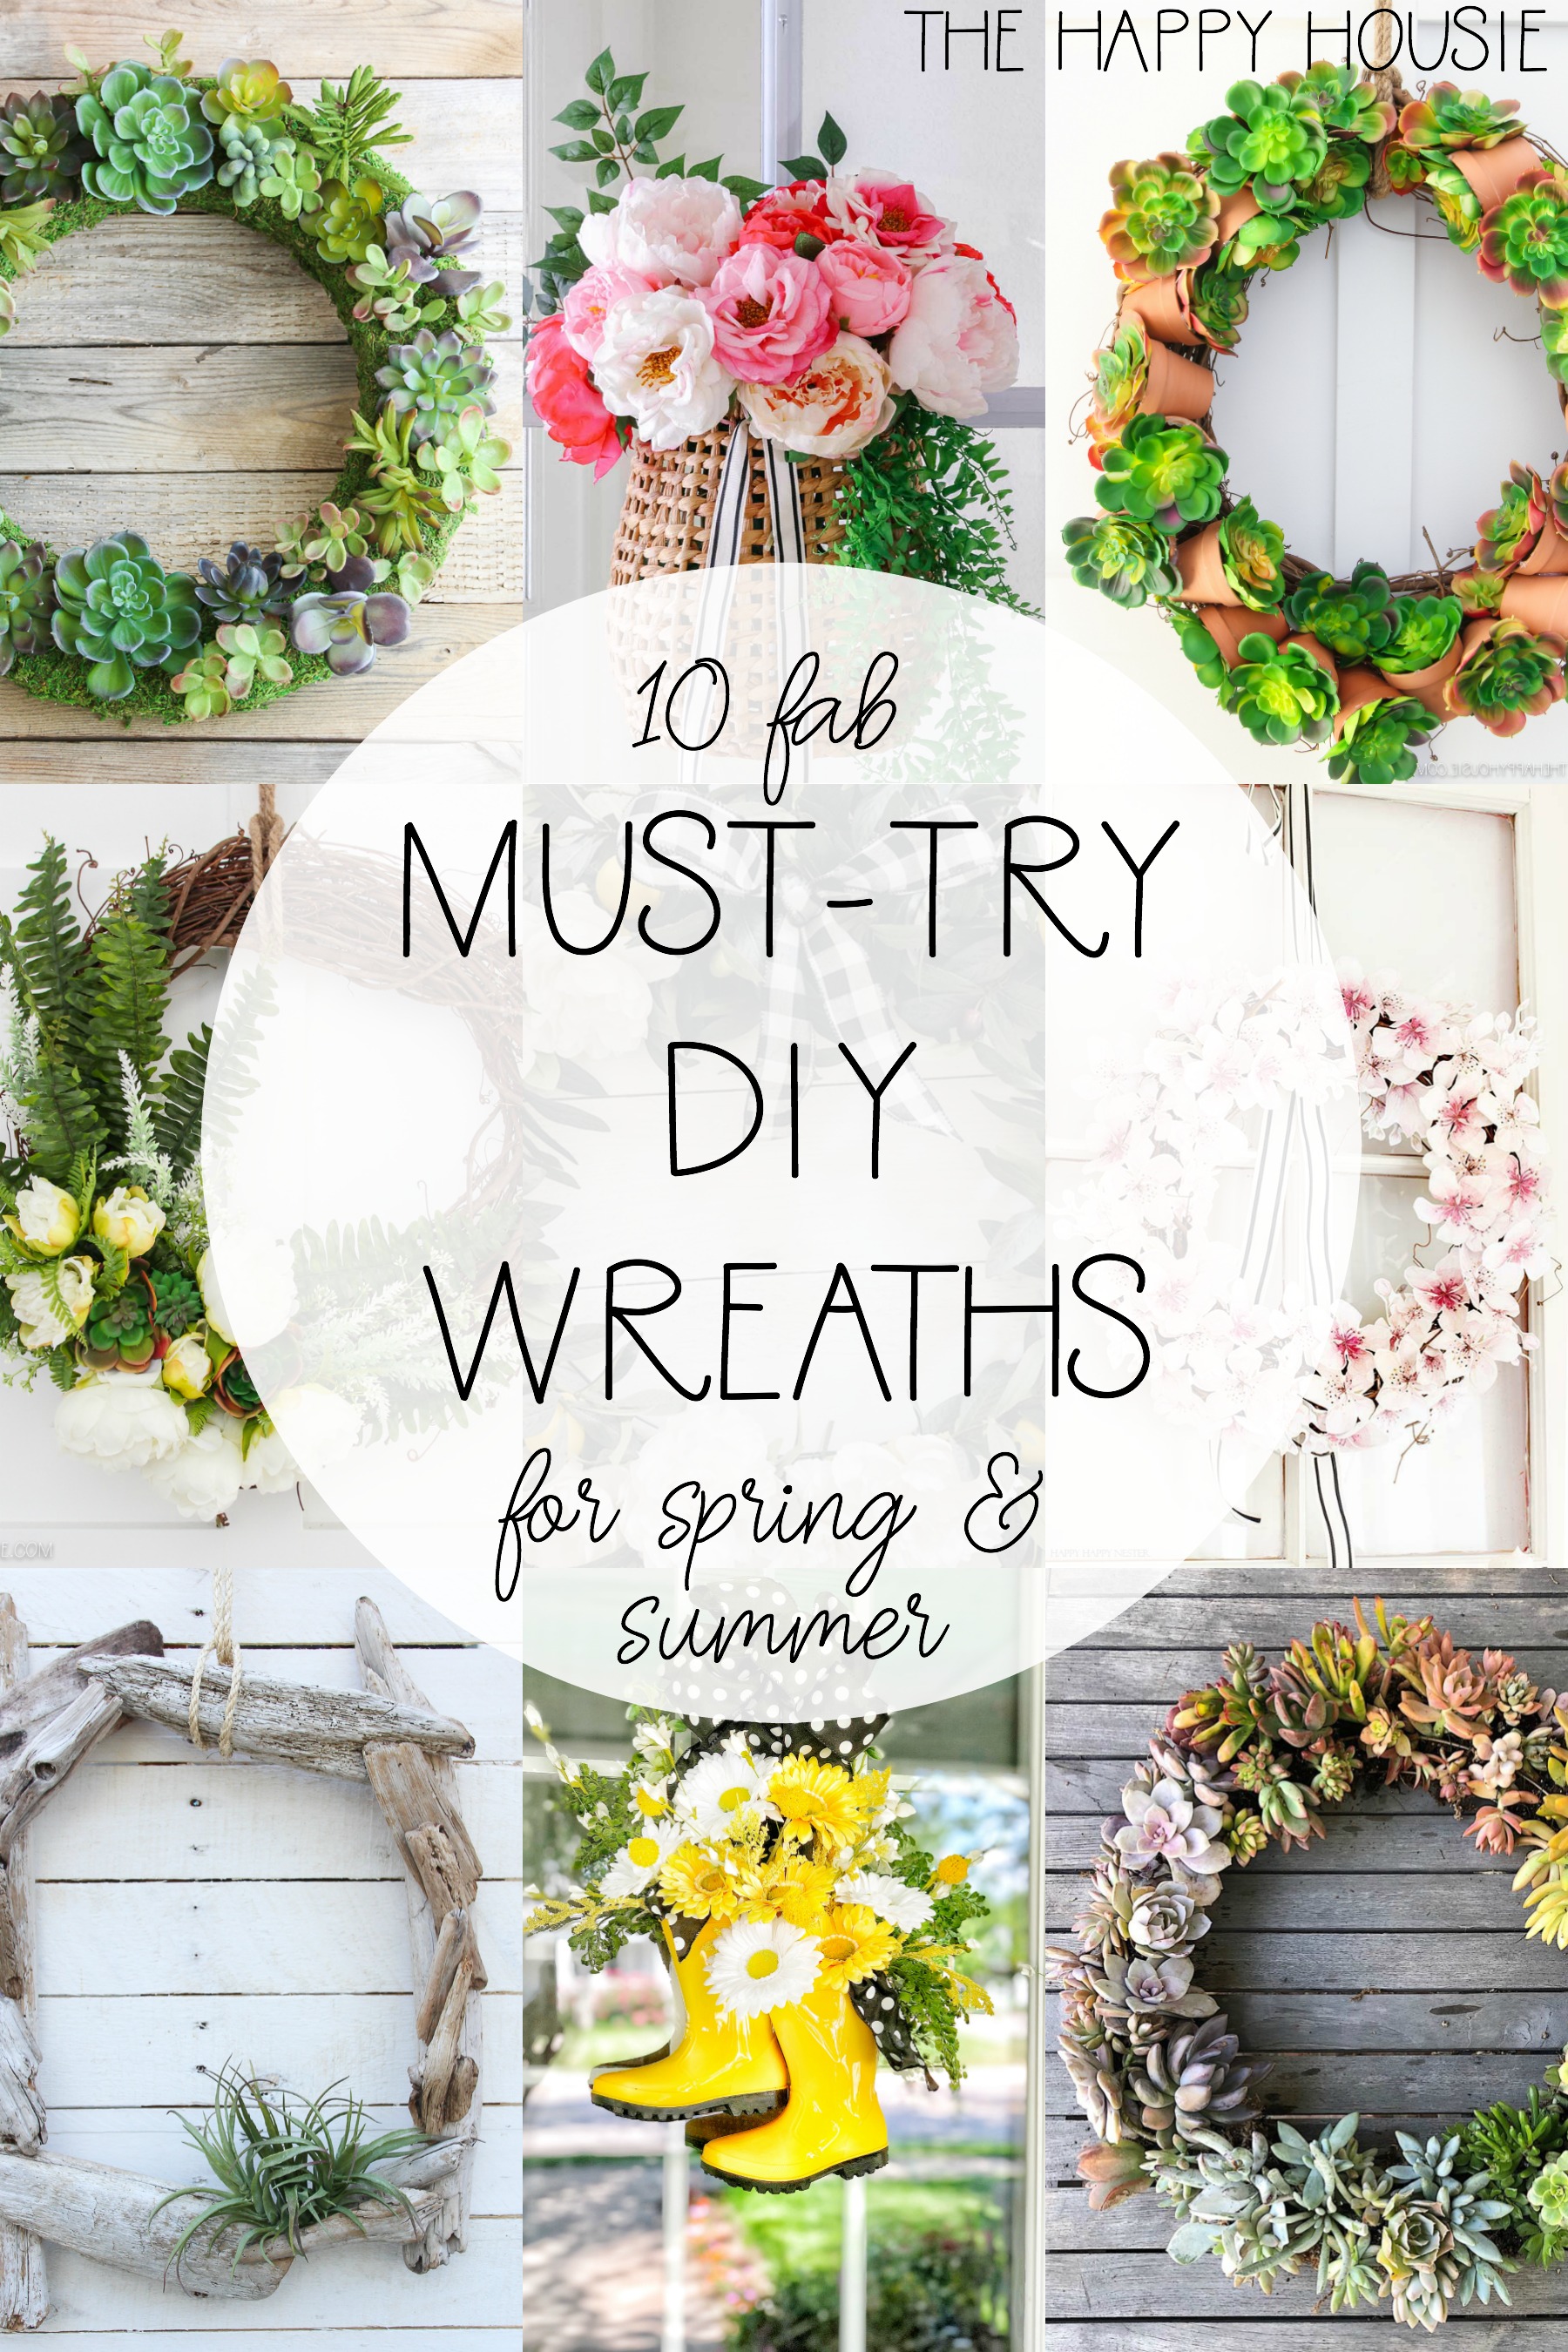 Must try DIY wreaths poster.